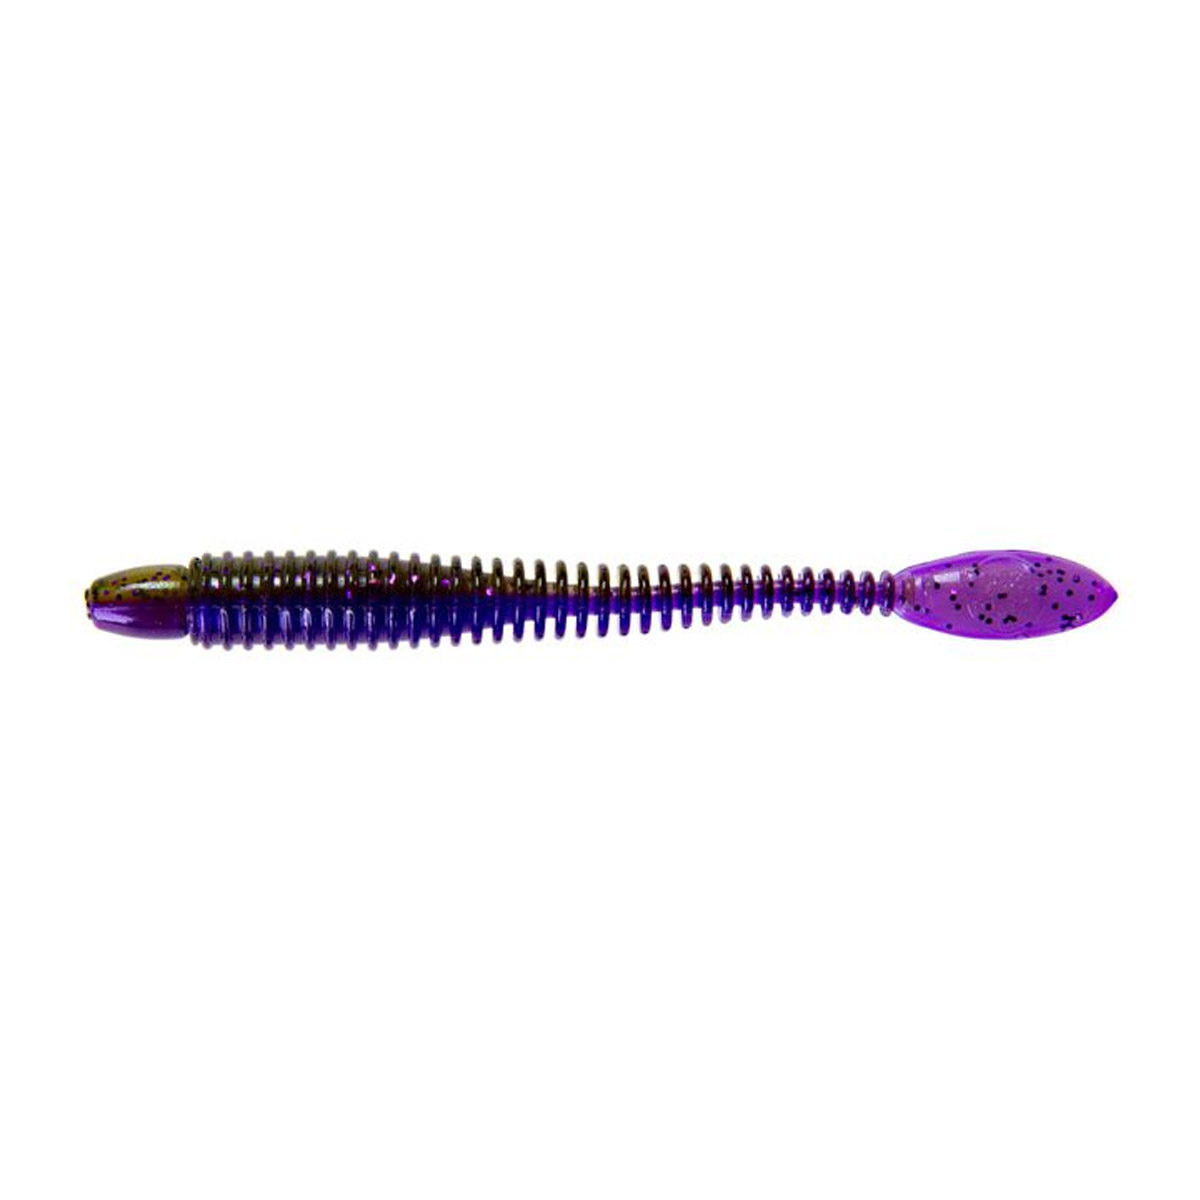 Lunker City Ribster 4,5 inch 